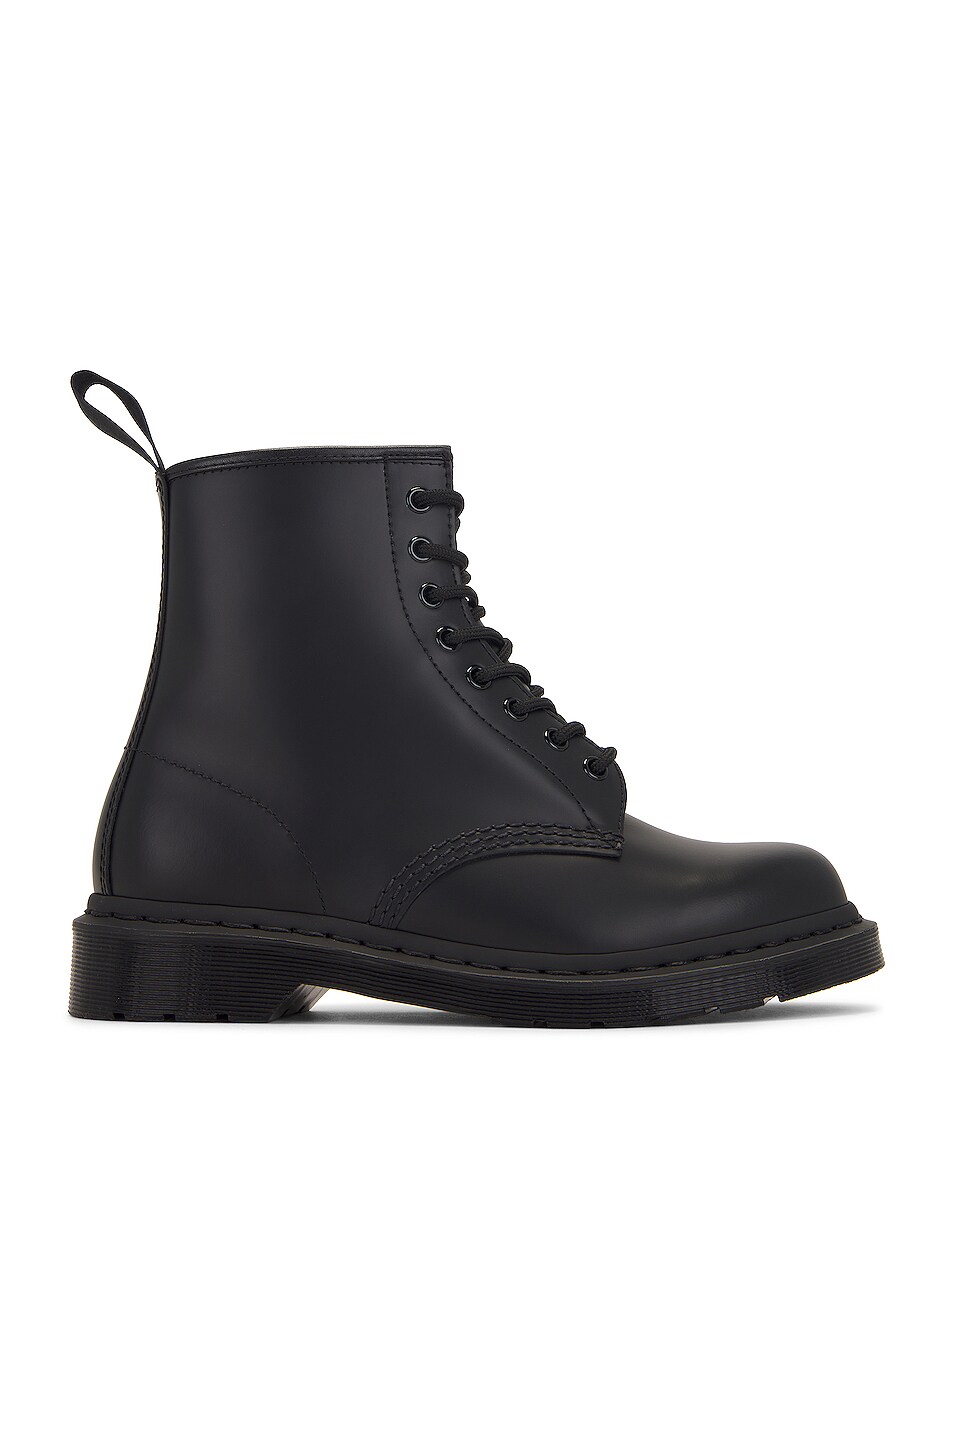 Image 1 of Dr. Martens 1460 Mono Smooth Boot in Black